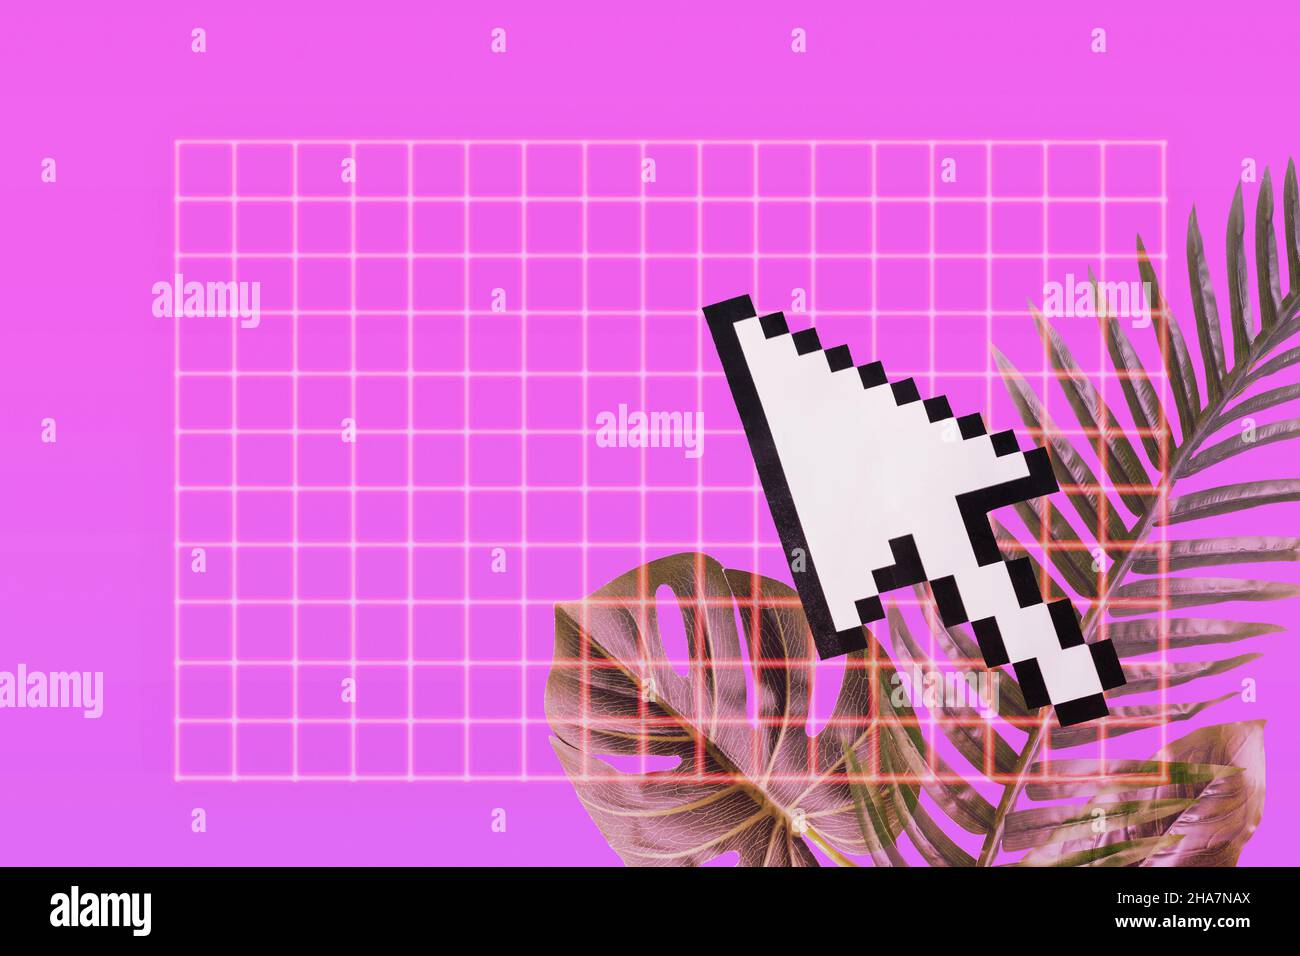 Retro-style collage with mouse cursor of computer monitor with neon palm grid. Concept of steam vaporwave in purple. Stock Photo